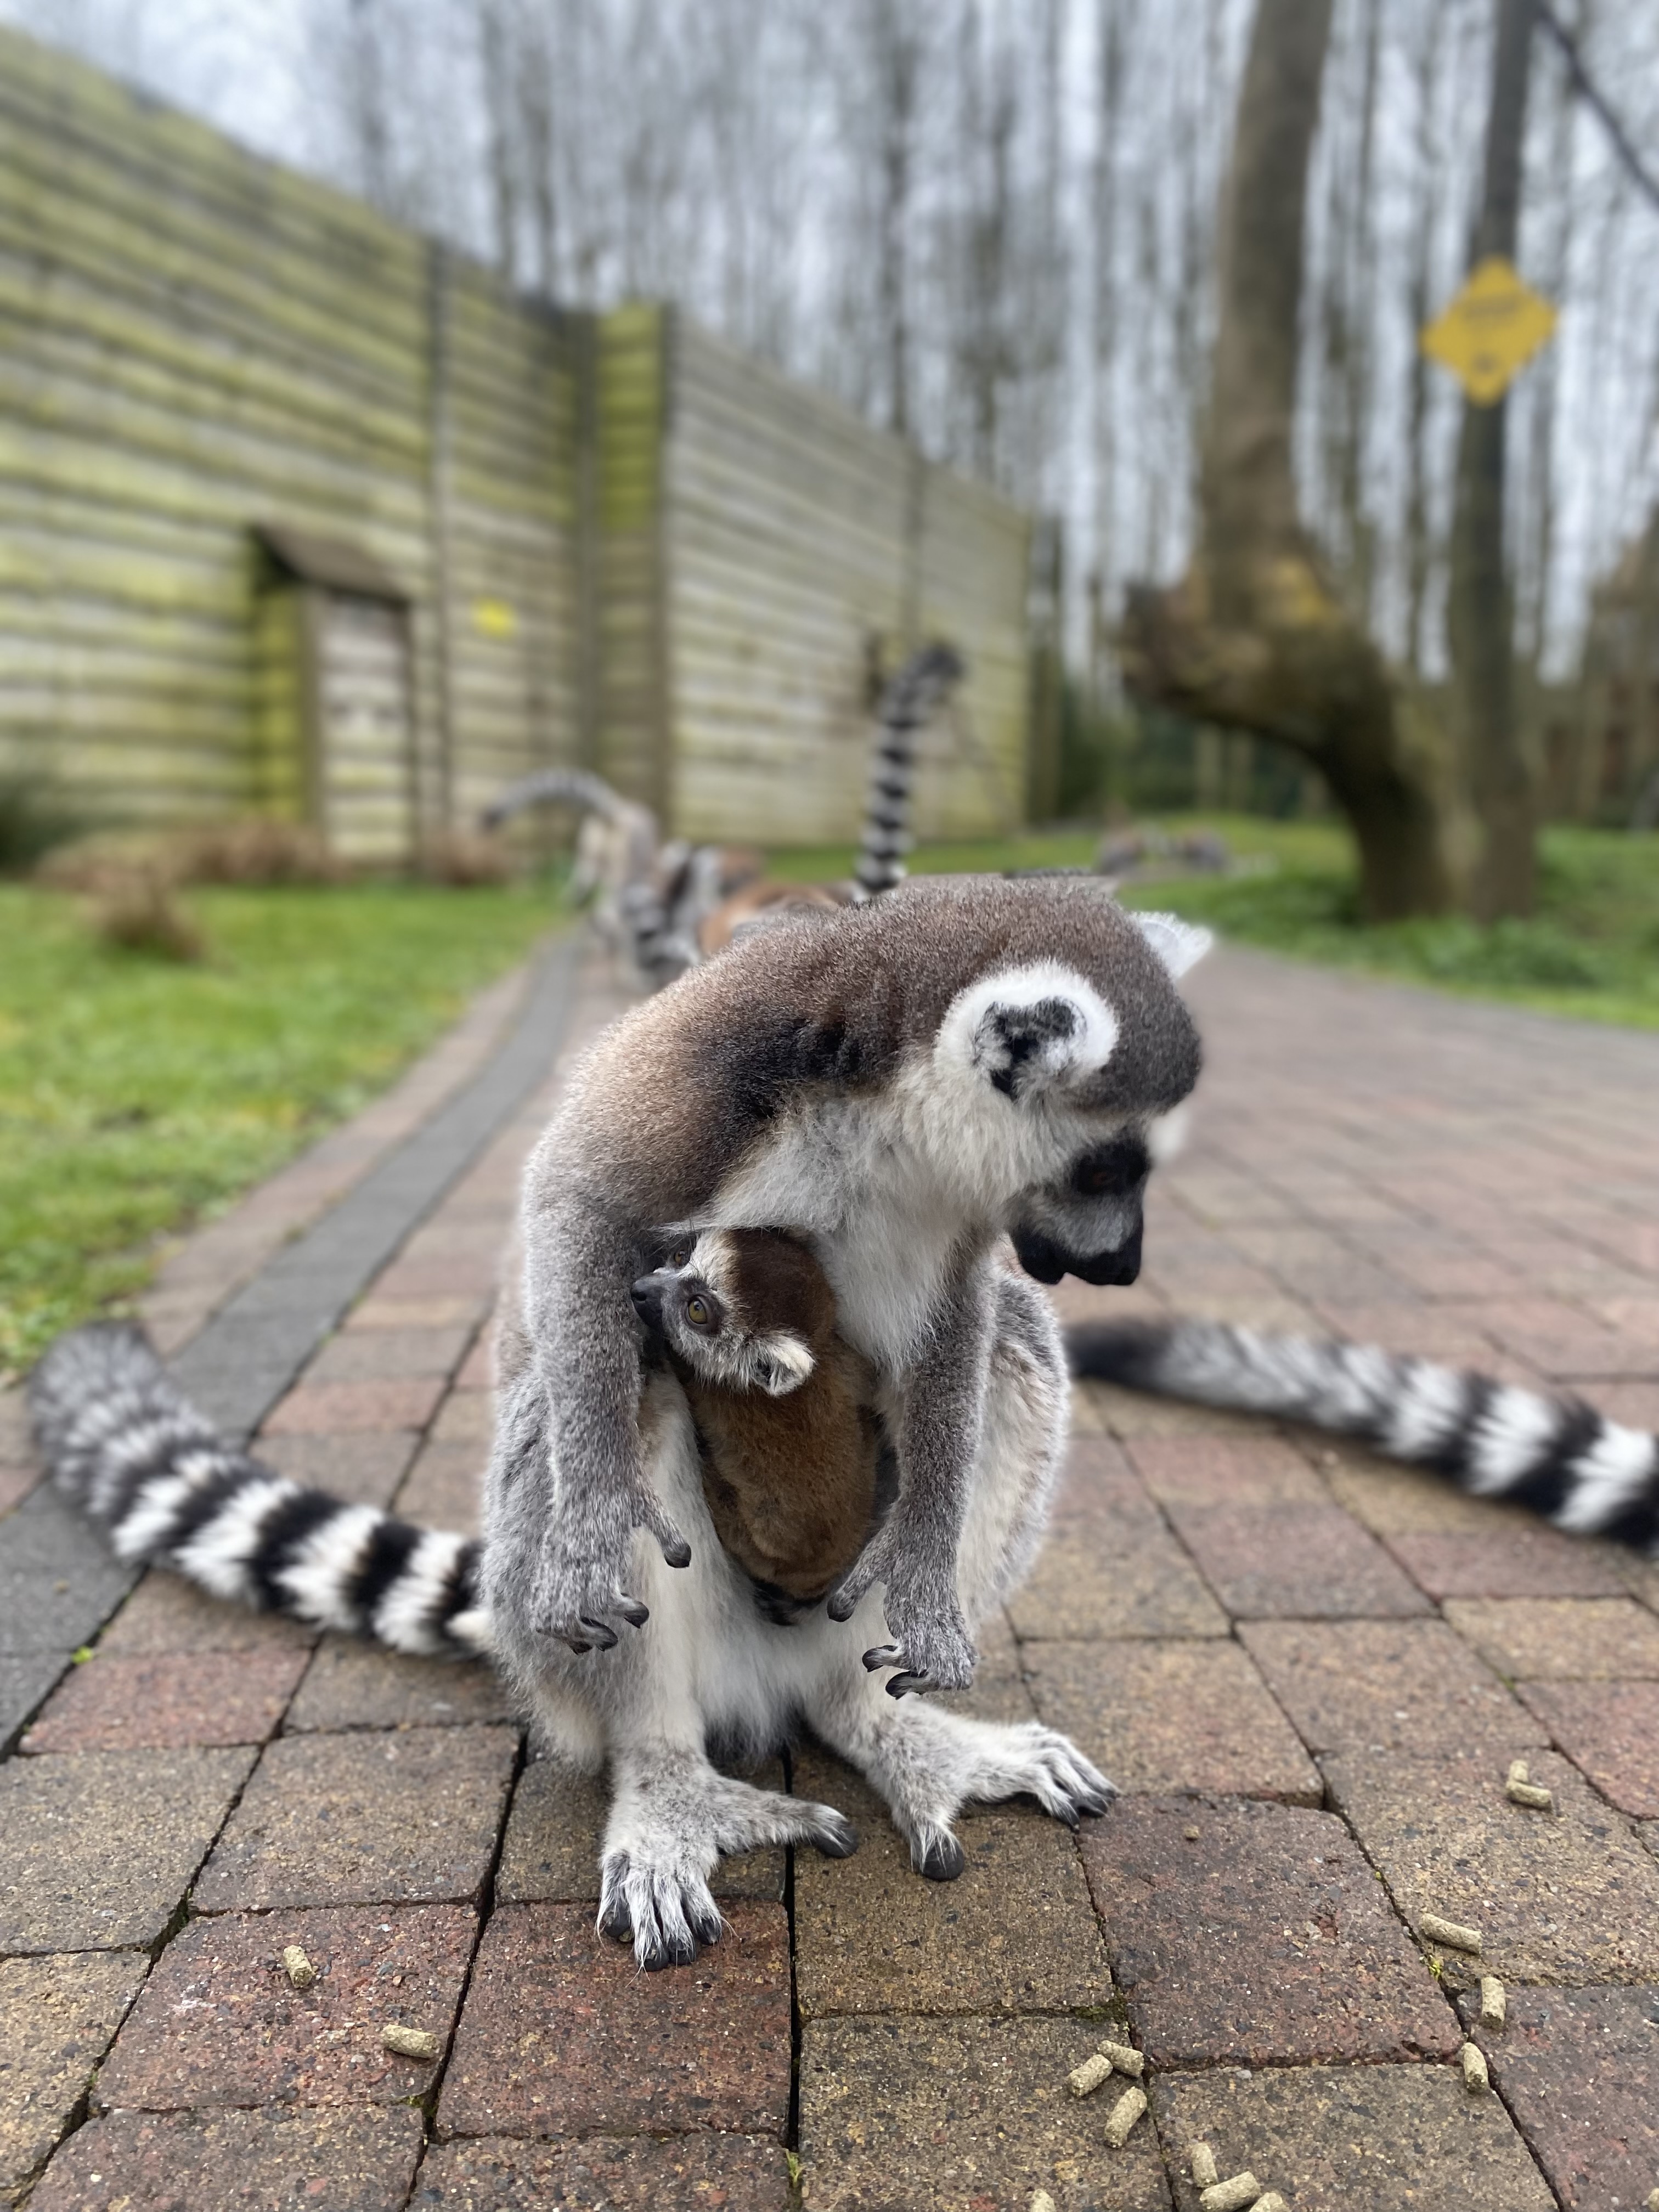 a baby ring-tailed lemur sat in its parents pouch